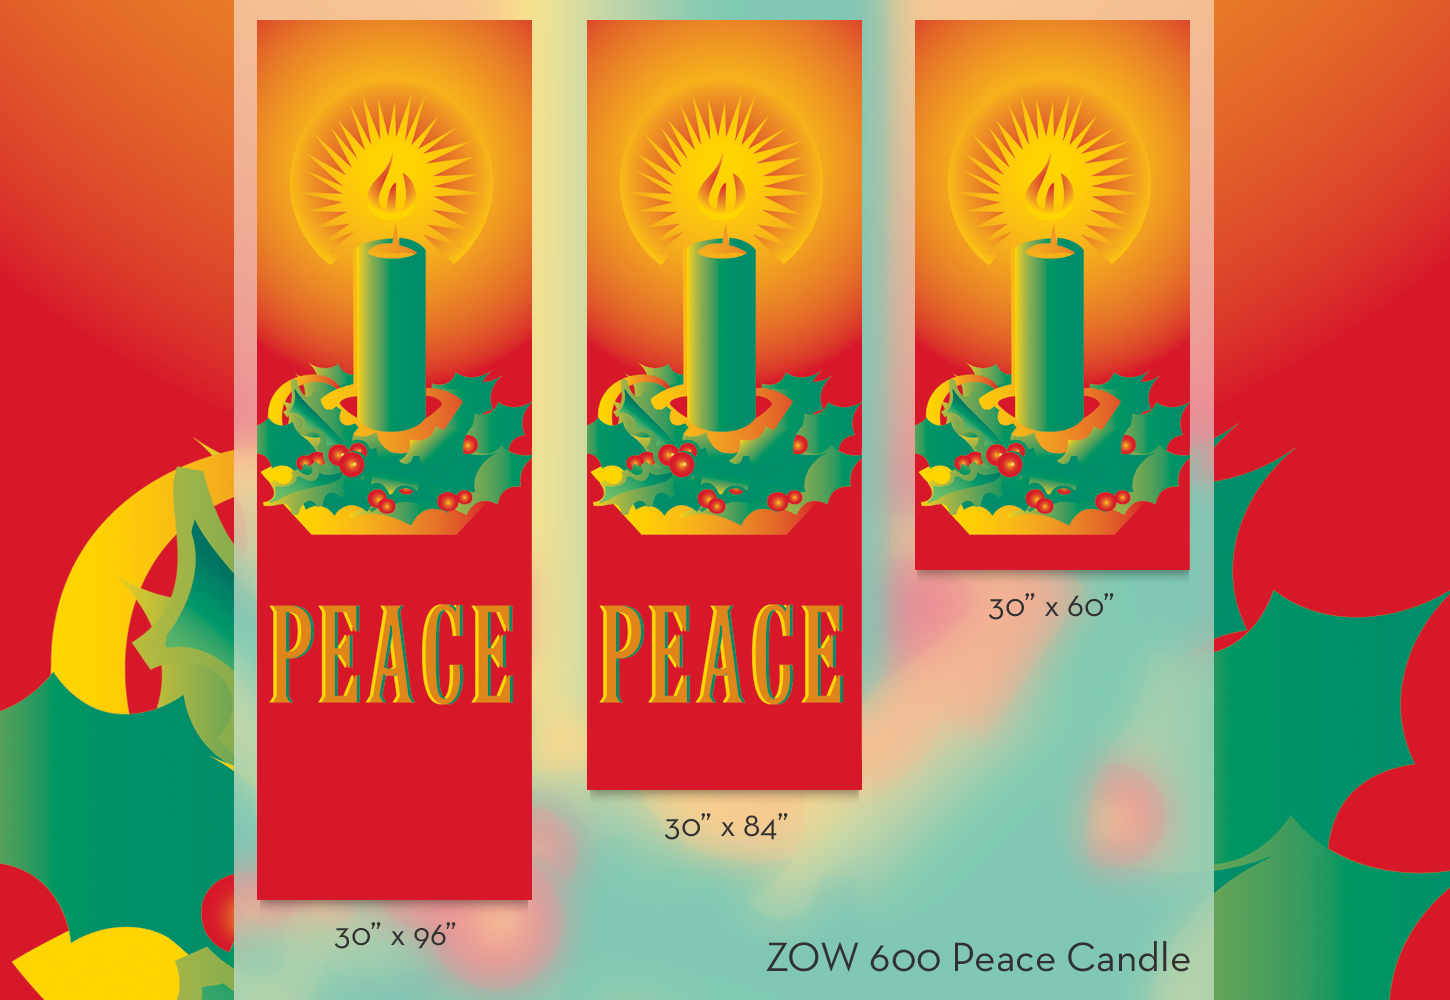 ZOW 600 Peace Candle